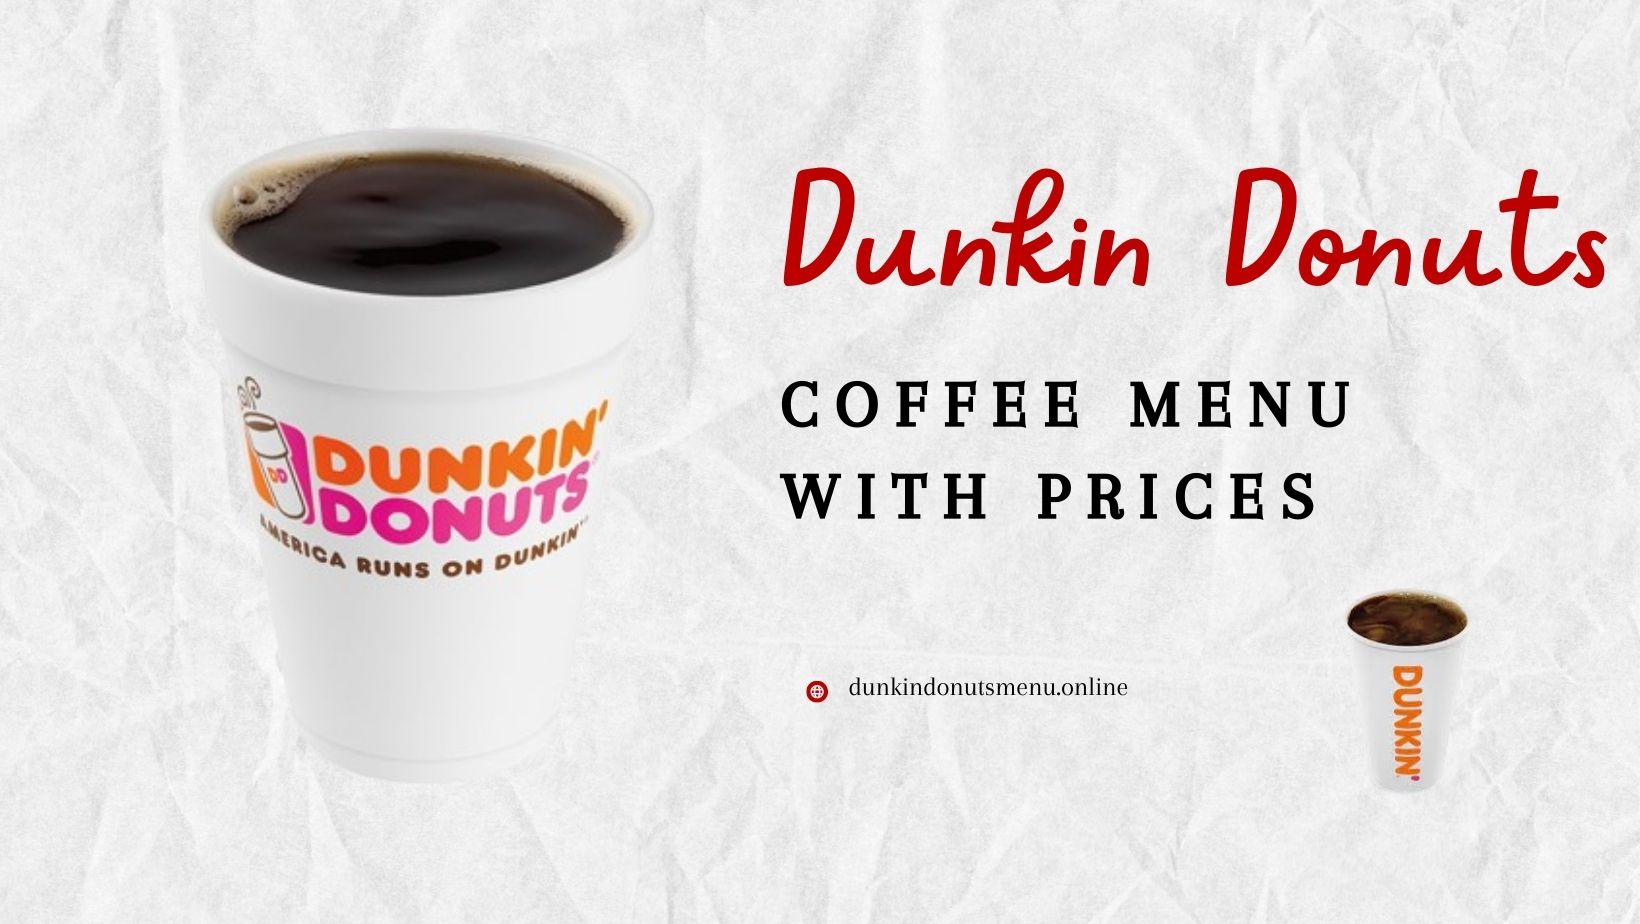 Dunkin Donuts Coffee Menu With Prices